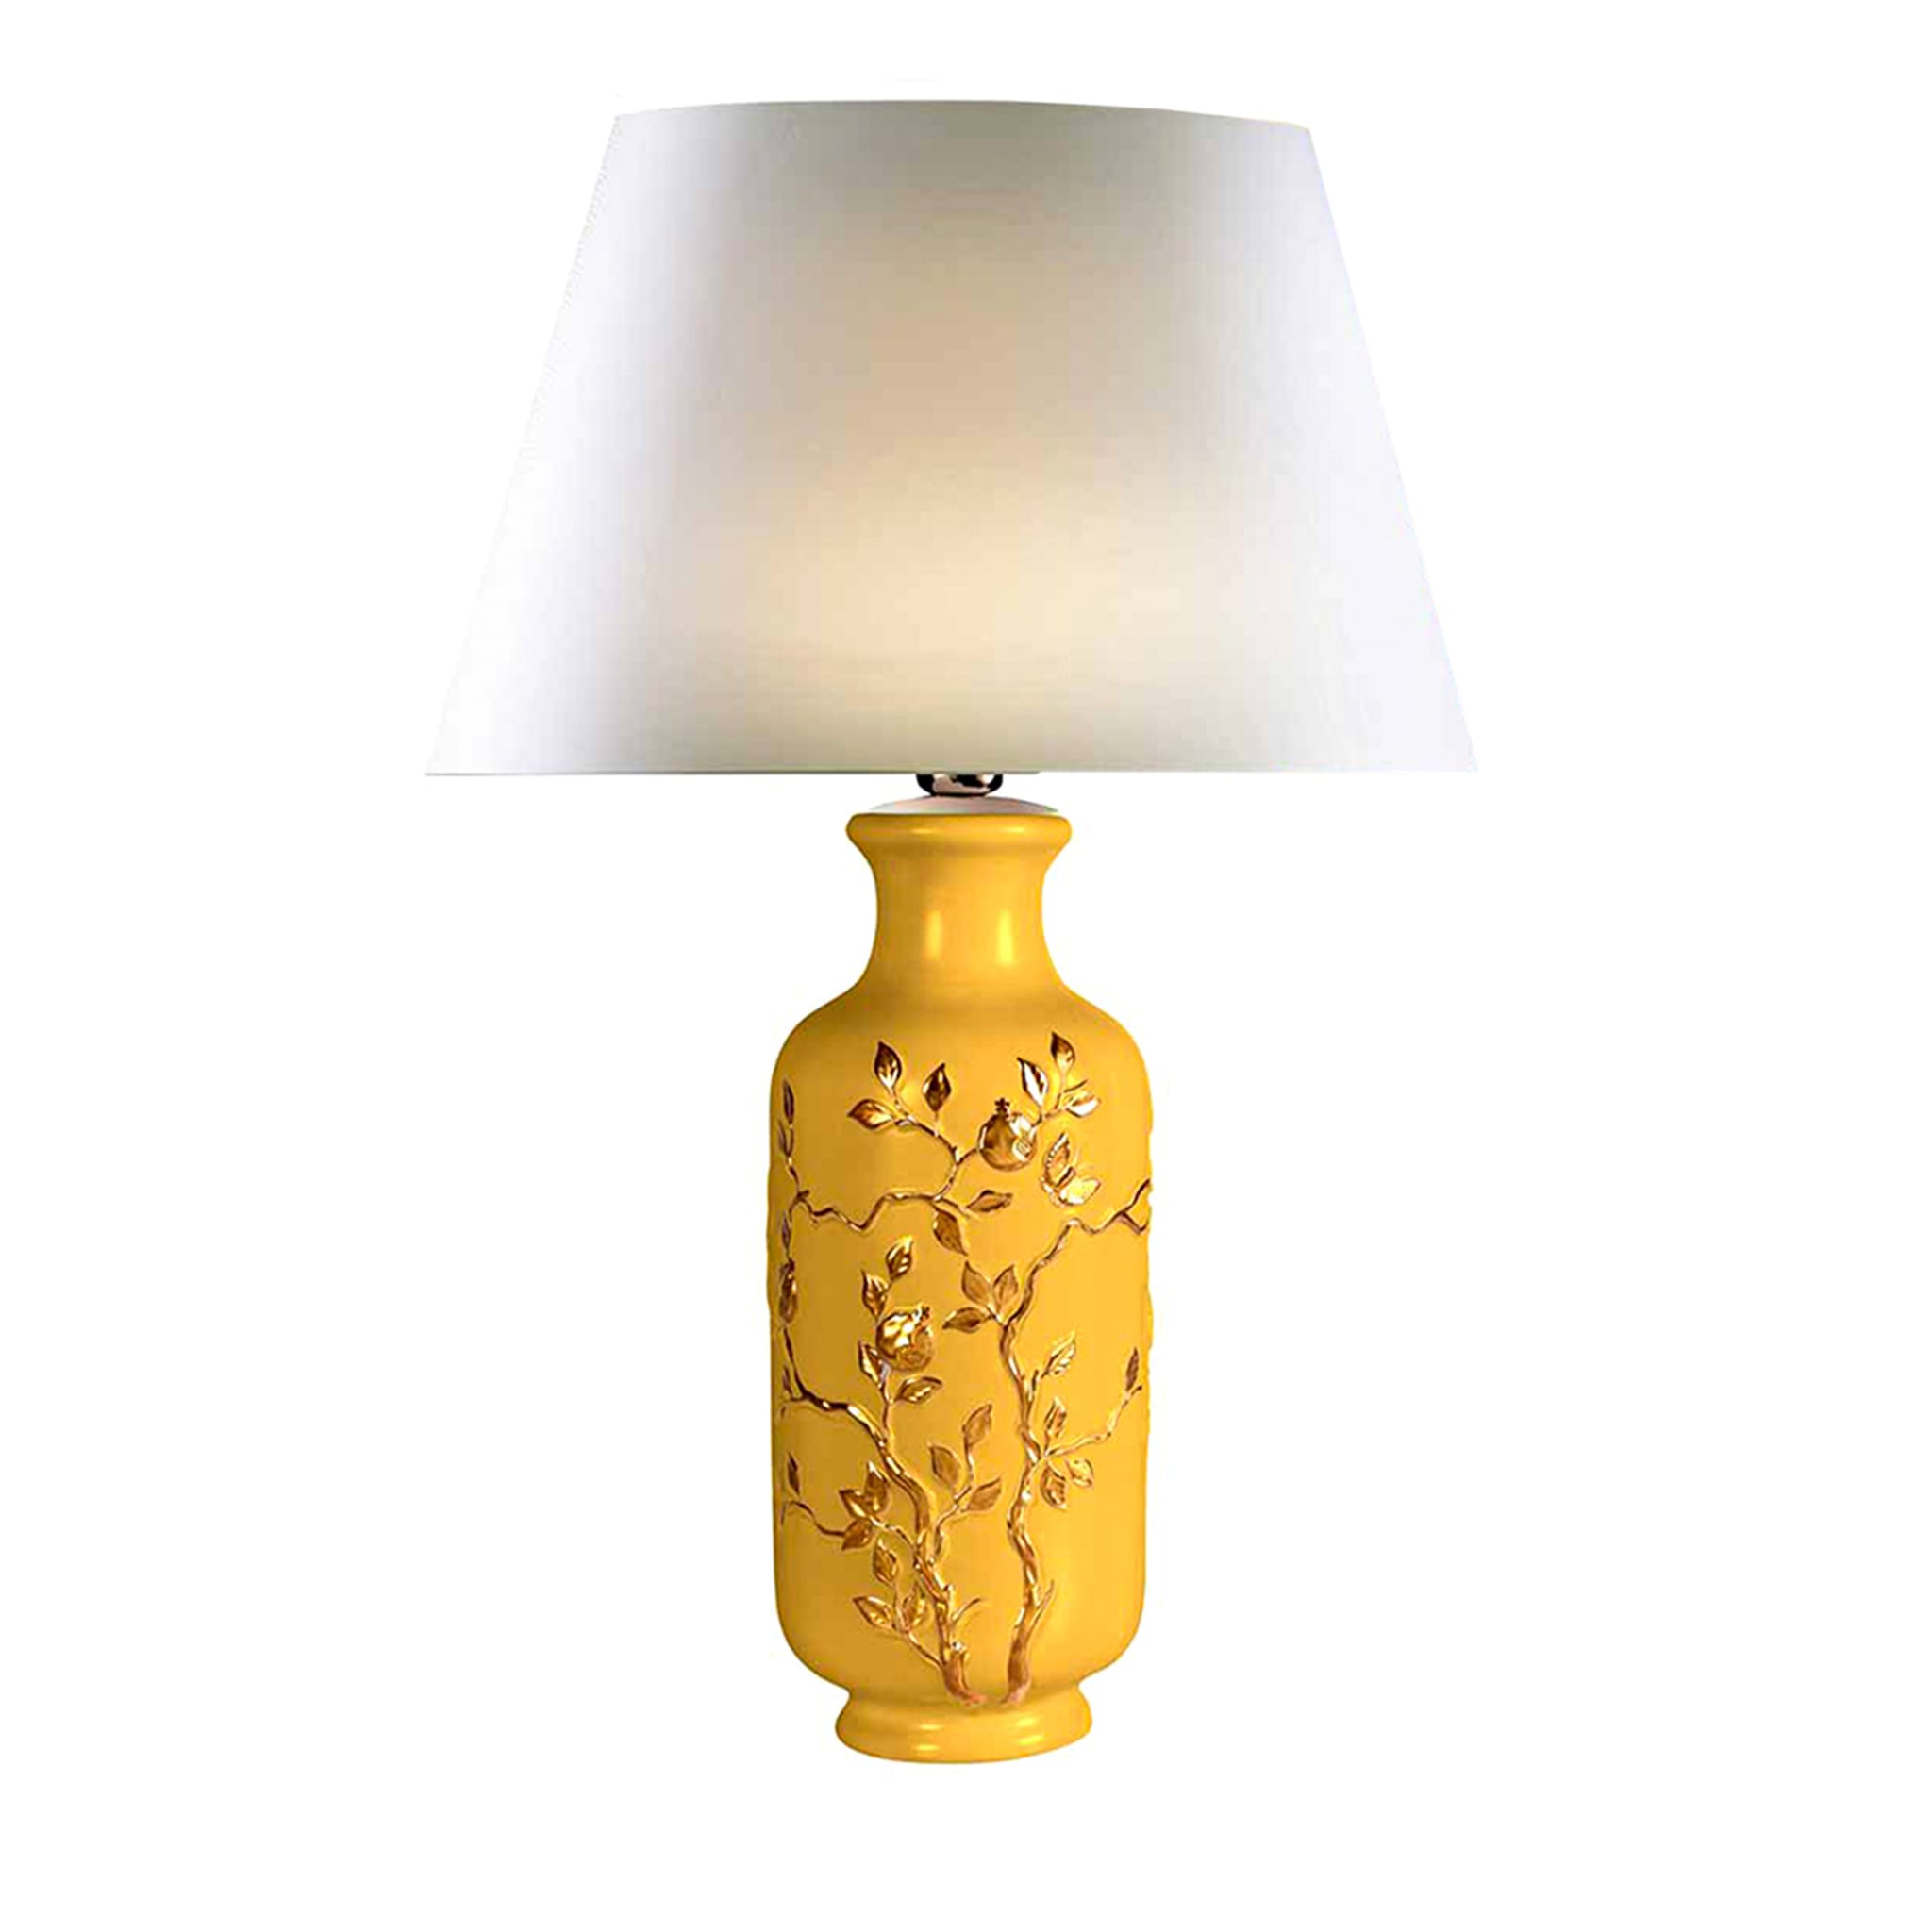 Dafne Small Yellow and Gold Table Lamp - Main view